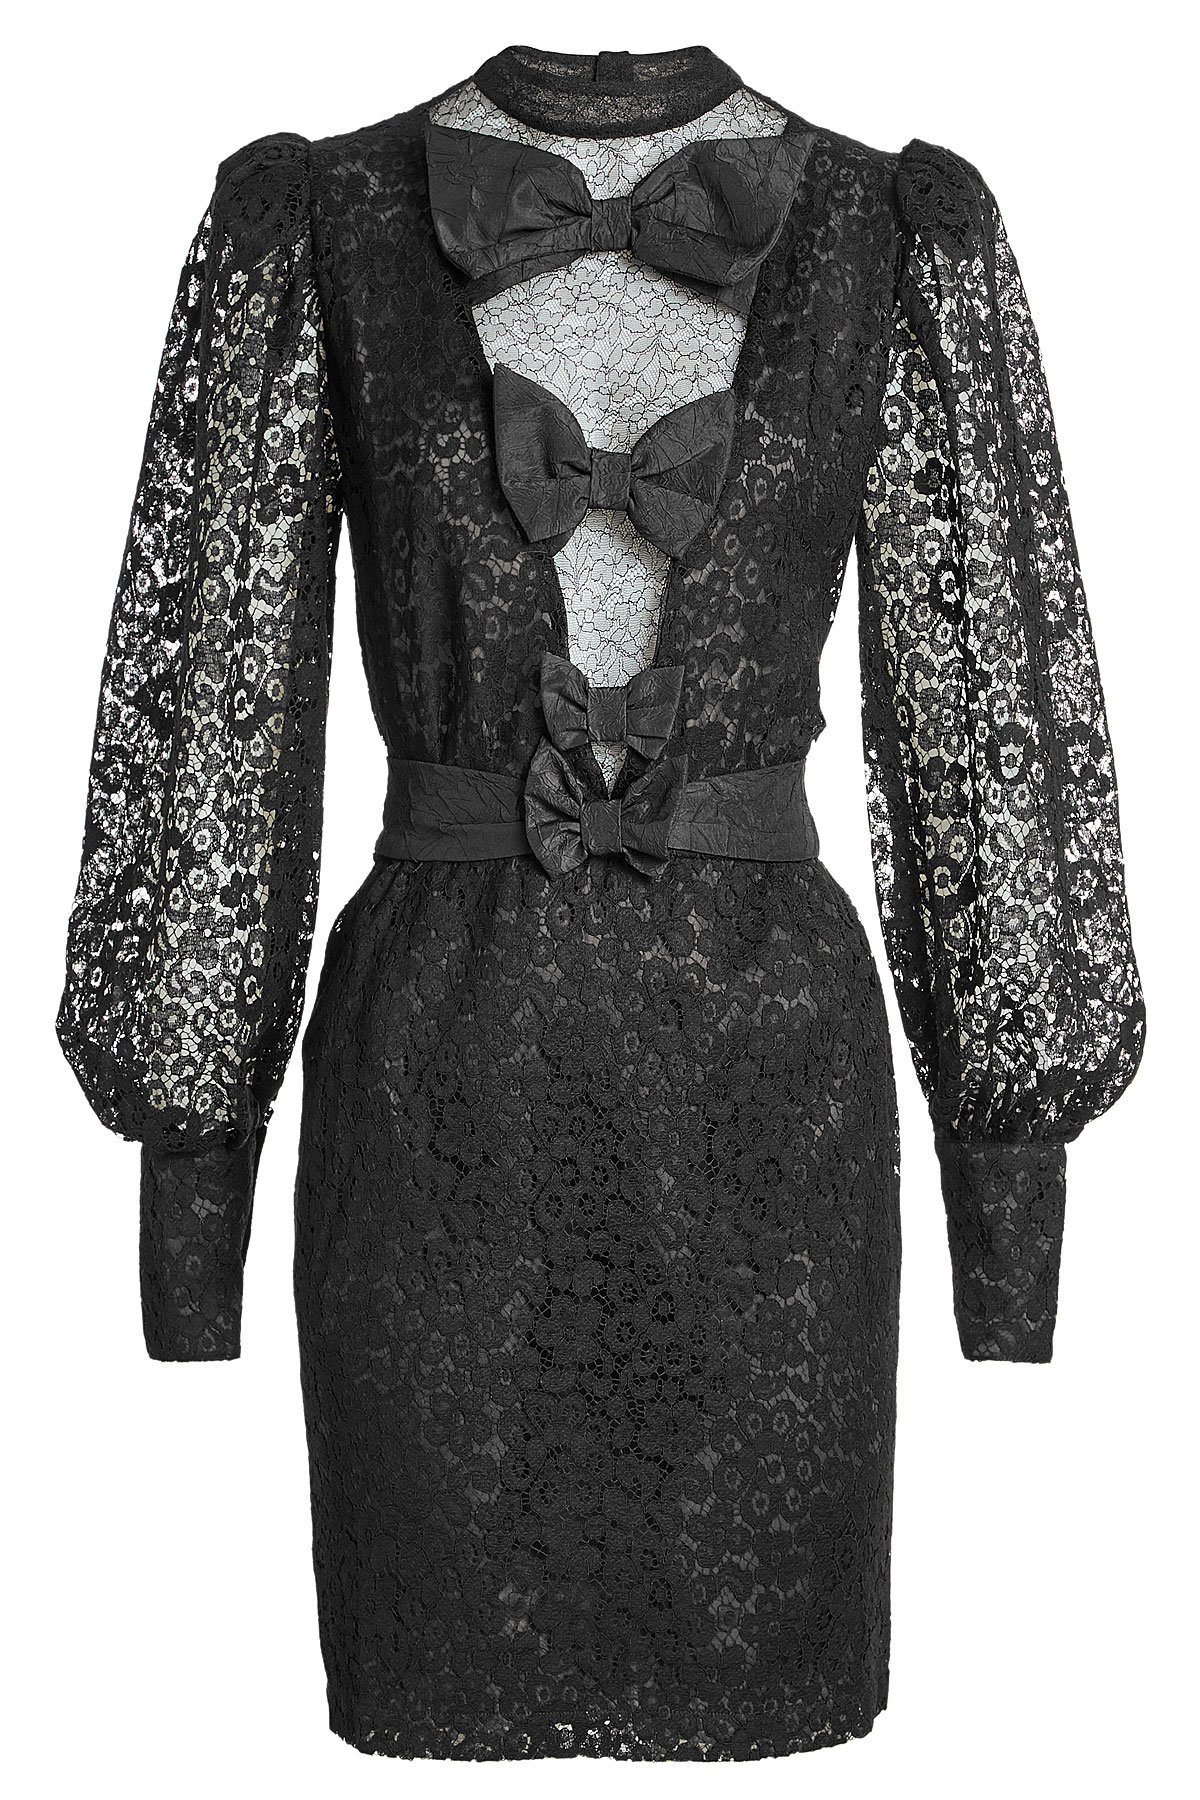 alessandra rich Lace Mini Dress with Bows Gr. IT 38 | ShopLook